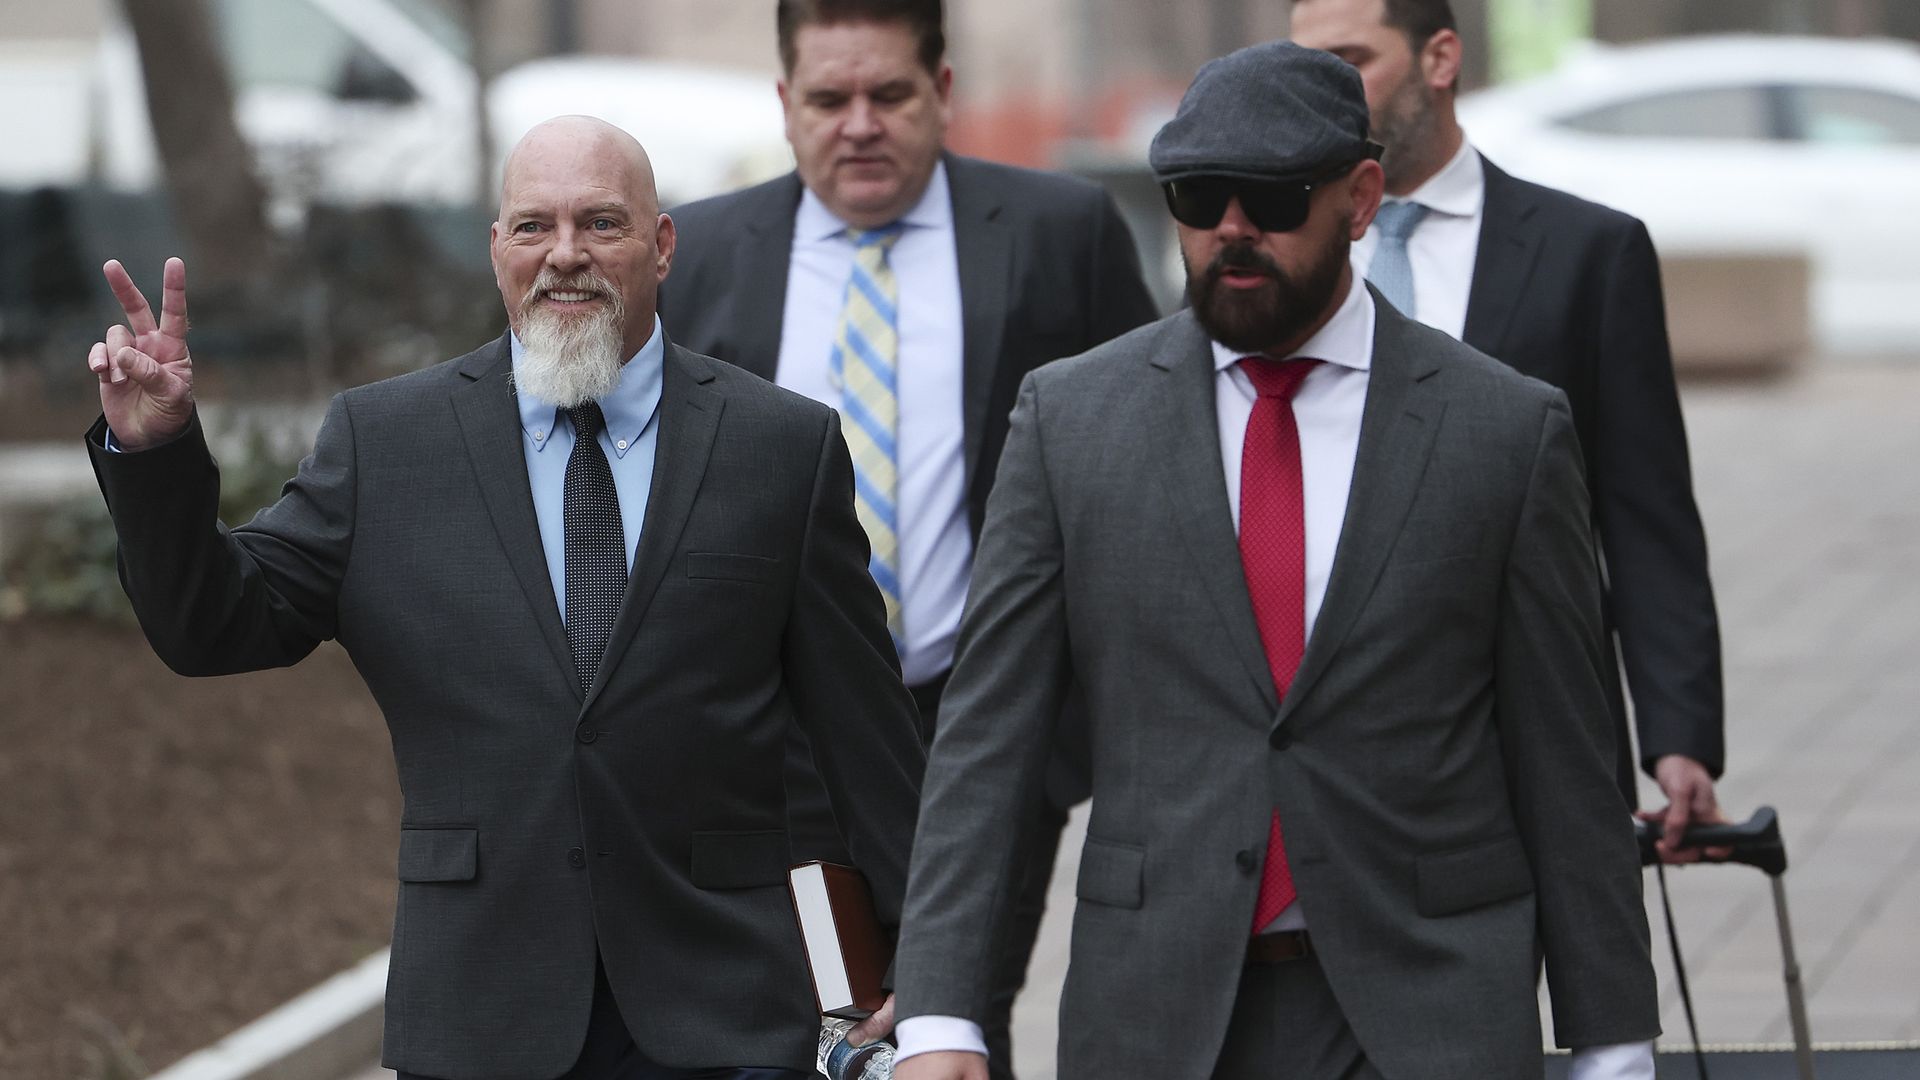 Richard 'Bigo' Barnett (L) arrives at the E. Barrett Prettyman United States Courthouse for jury selection in his trial on January 10, 2023 in Washington, DC.